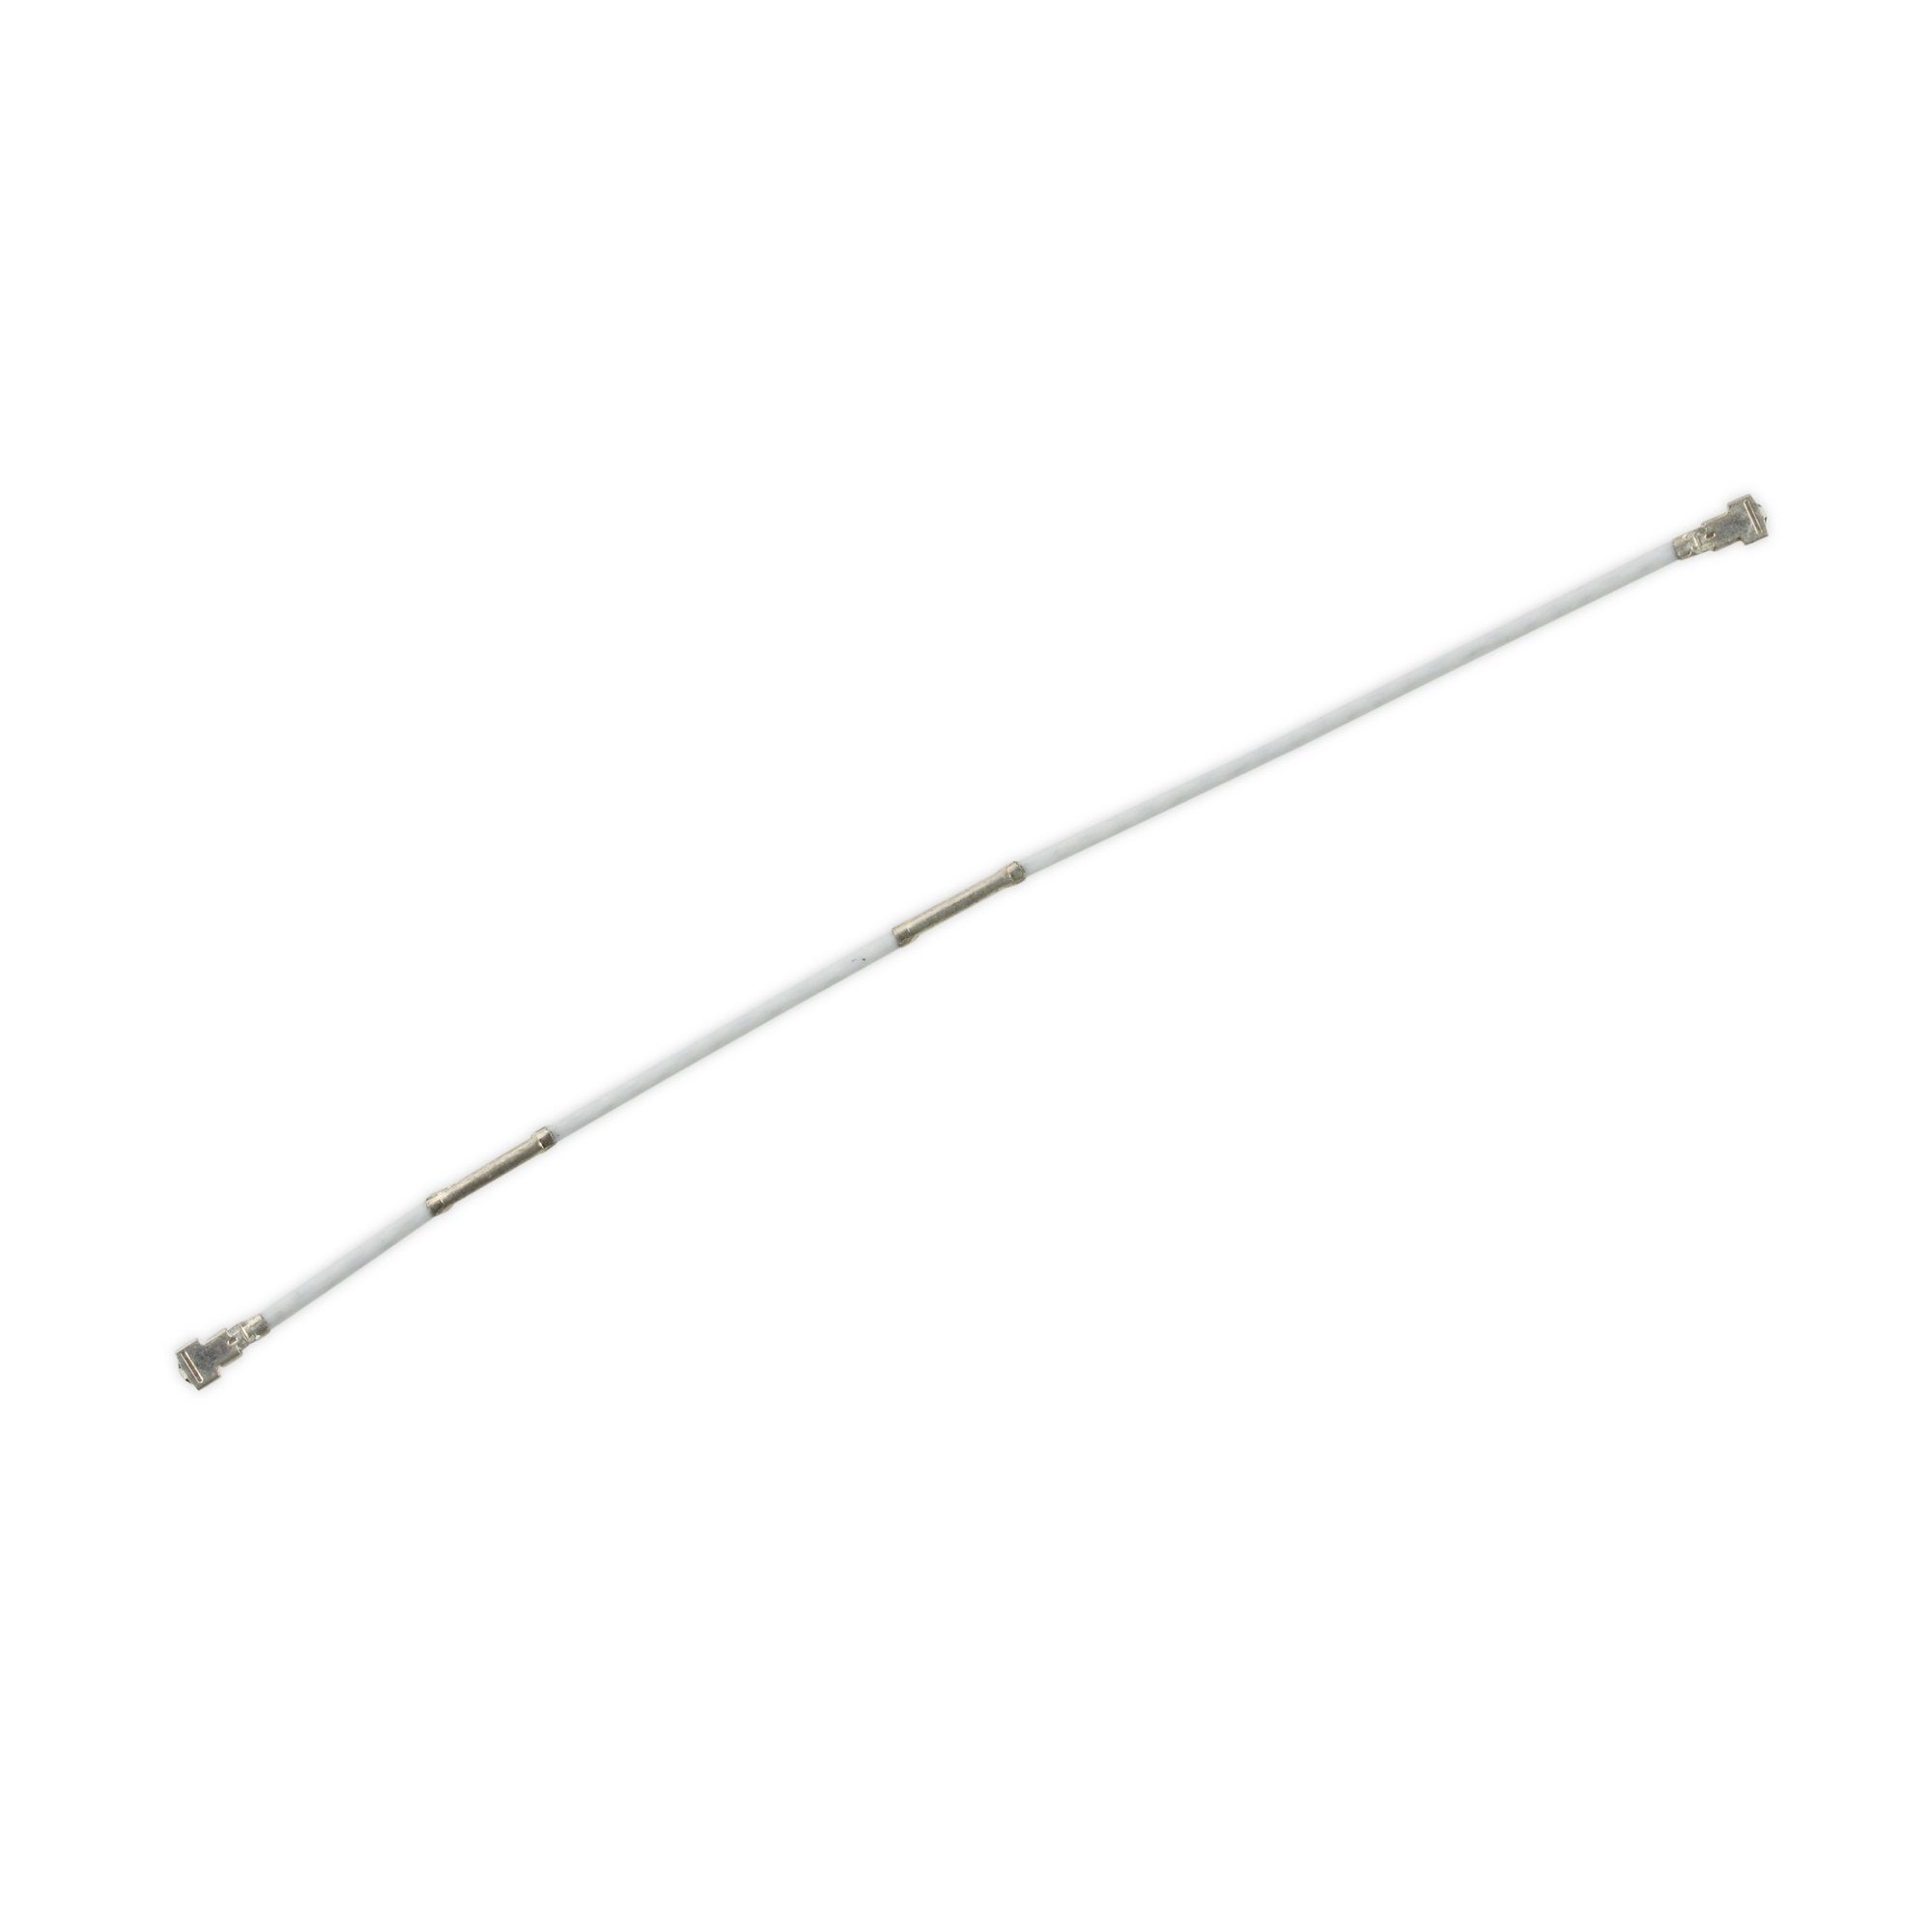 LG G3 Antenna Cable